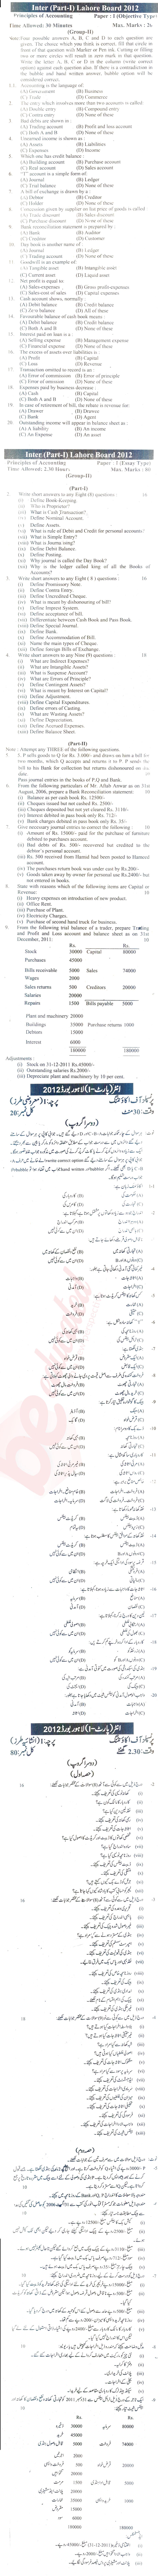 Principles of Accounting ICOM Part 1 Past Paper Group 2 BISE Lahore 2012